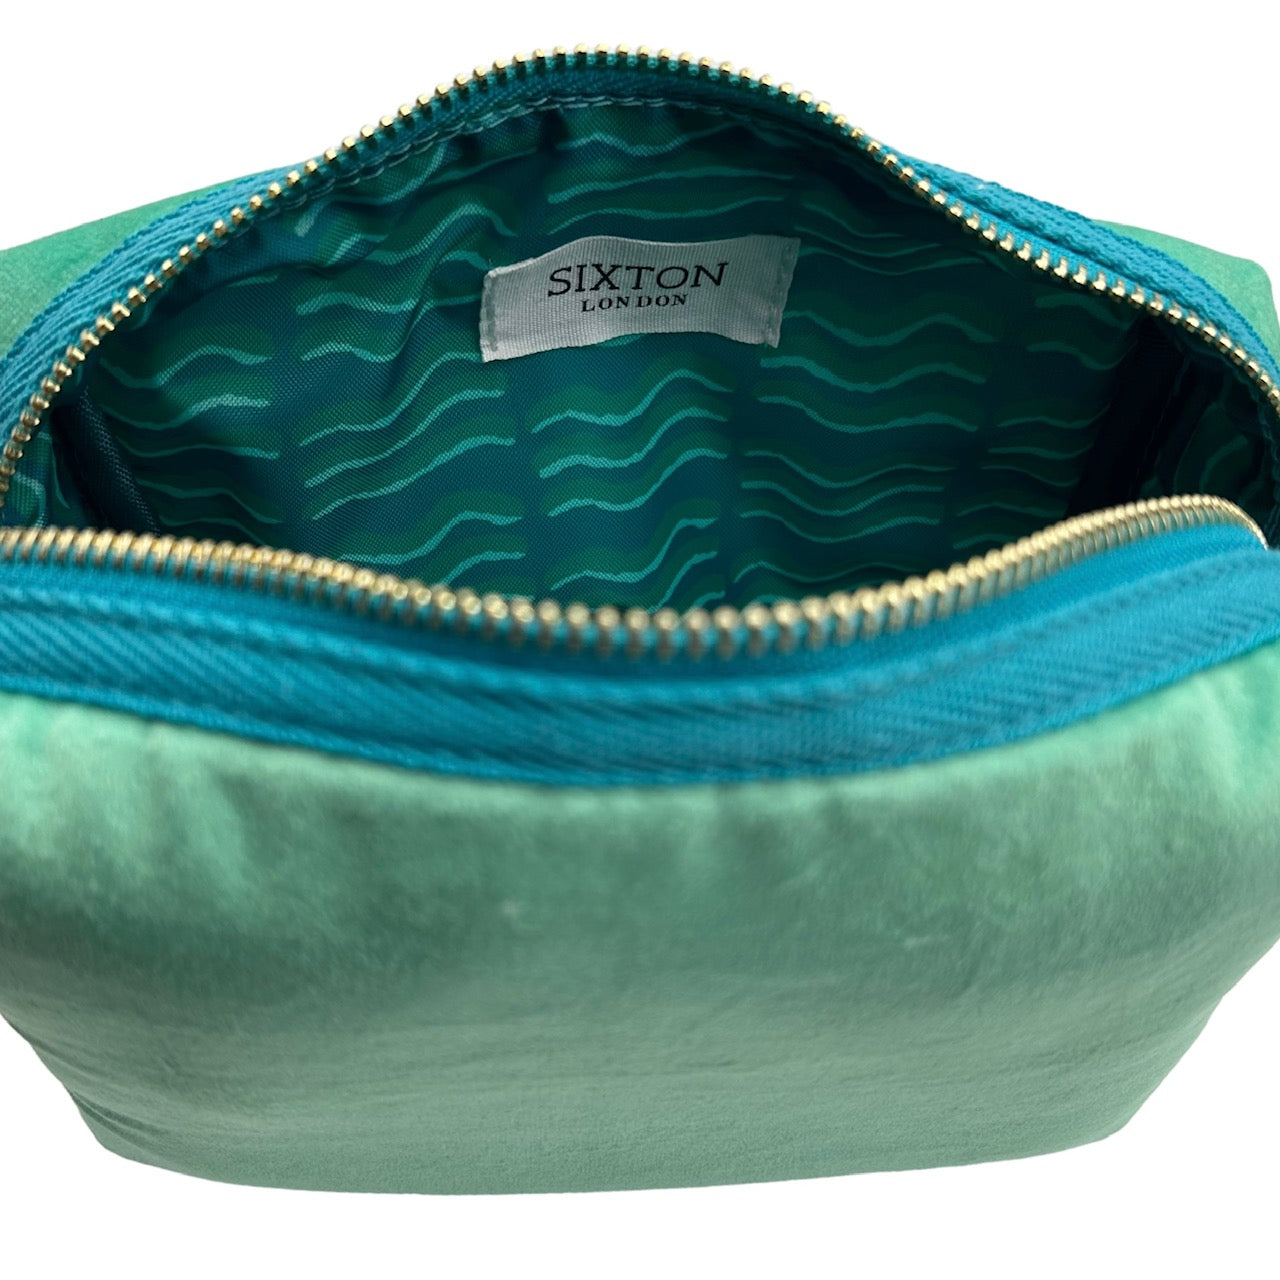 Marine make-up bag & mint shell brooch - recycled velvet, large and small